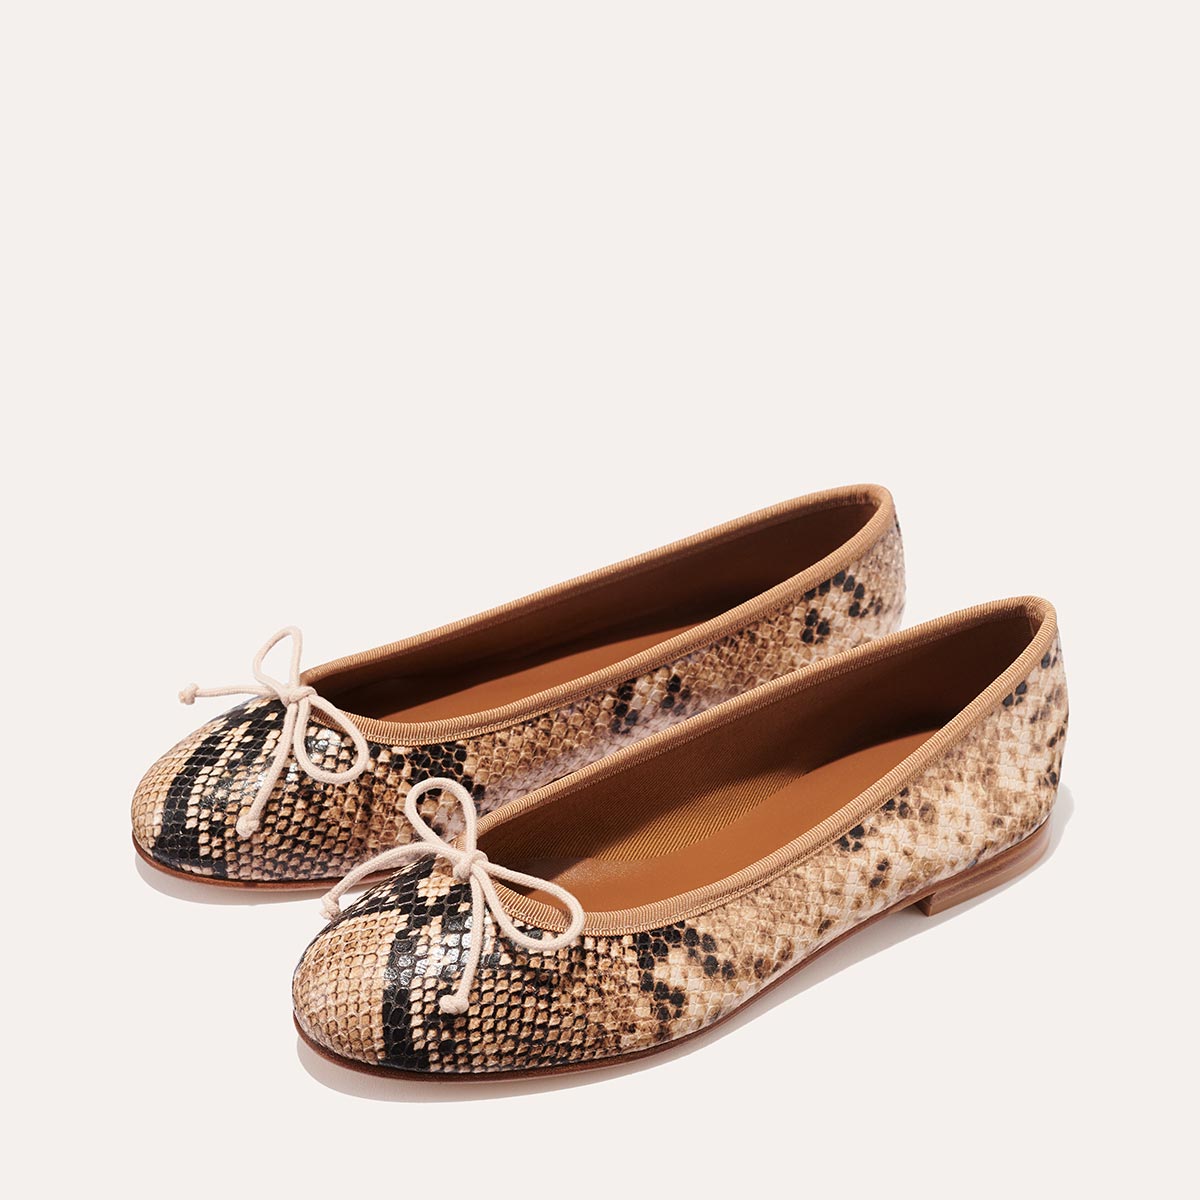 Margaux's classic and comfortable Demi ballet flat, made in a python-embossed leather 